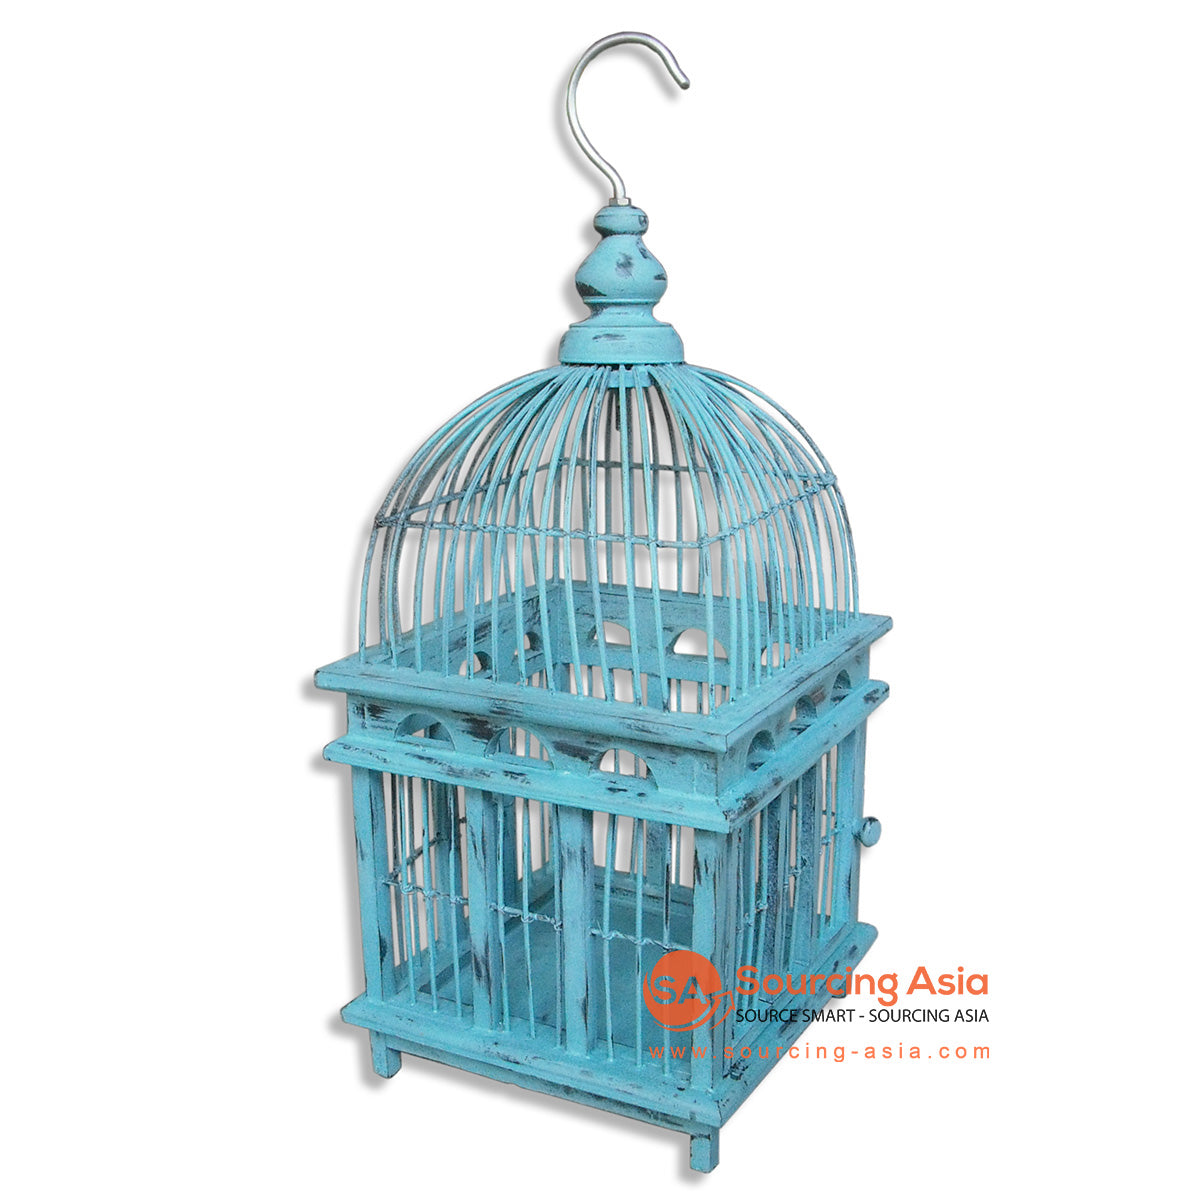 SM026-1 BLUE WOODEN BIRD CAGE - Sourcing Asia